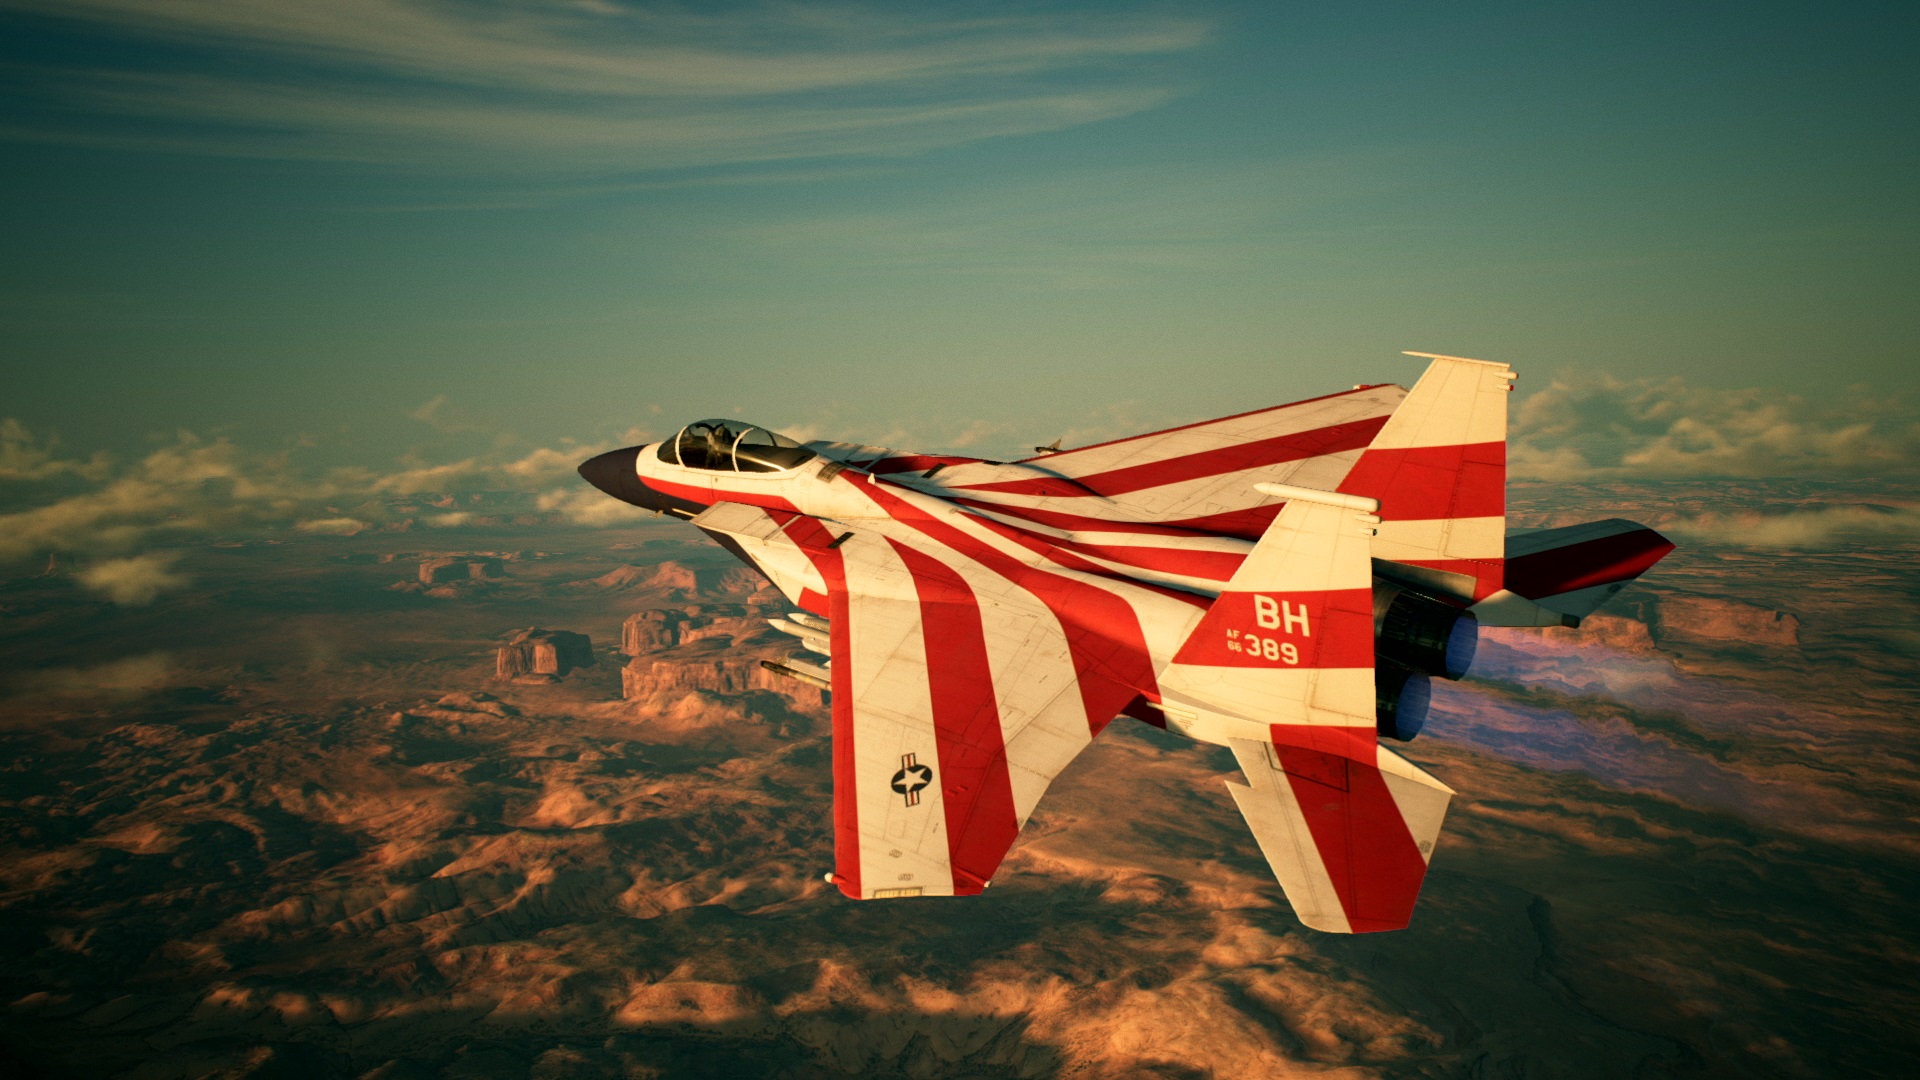 Ace Combat 7: Skies Unknown 25th Anniversary DLC ‘U.S. Original Aircraft Series’ Launches October 27